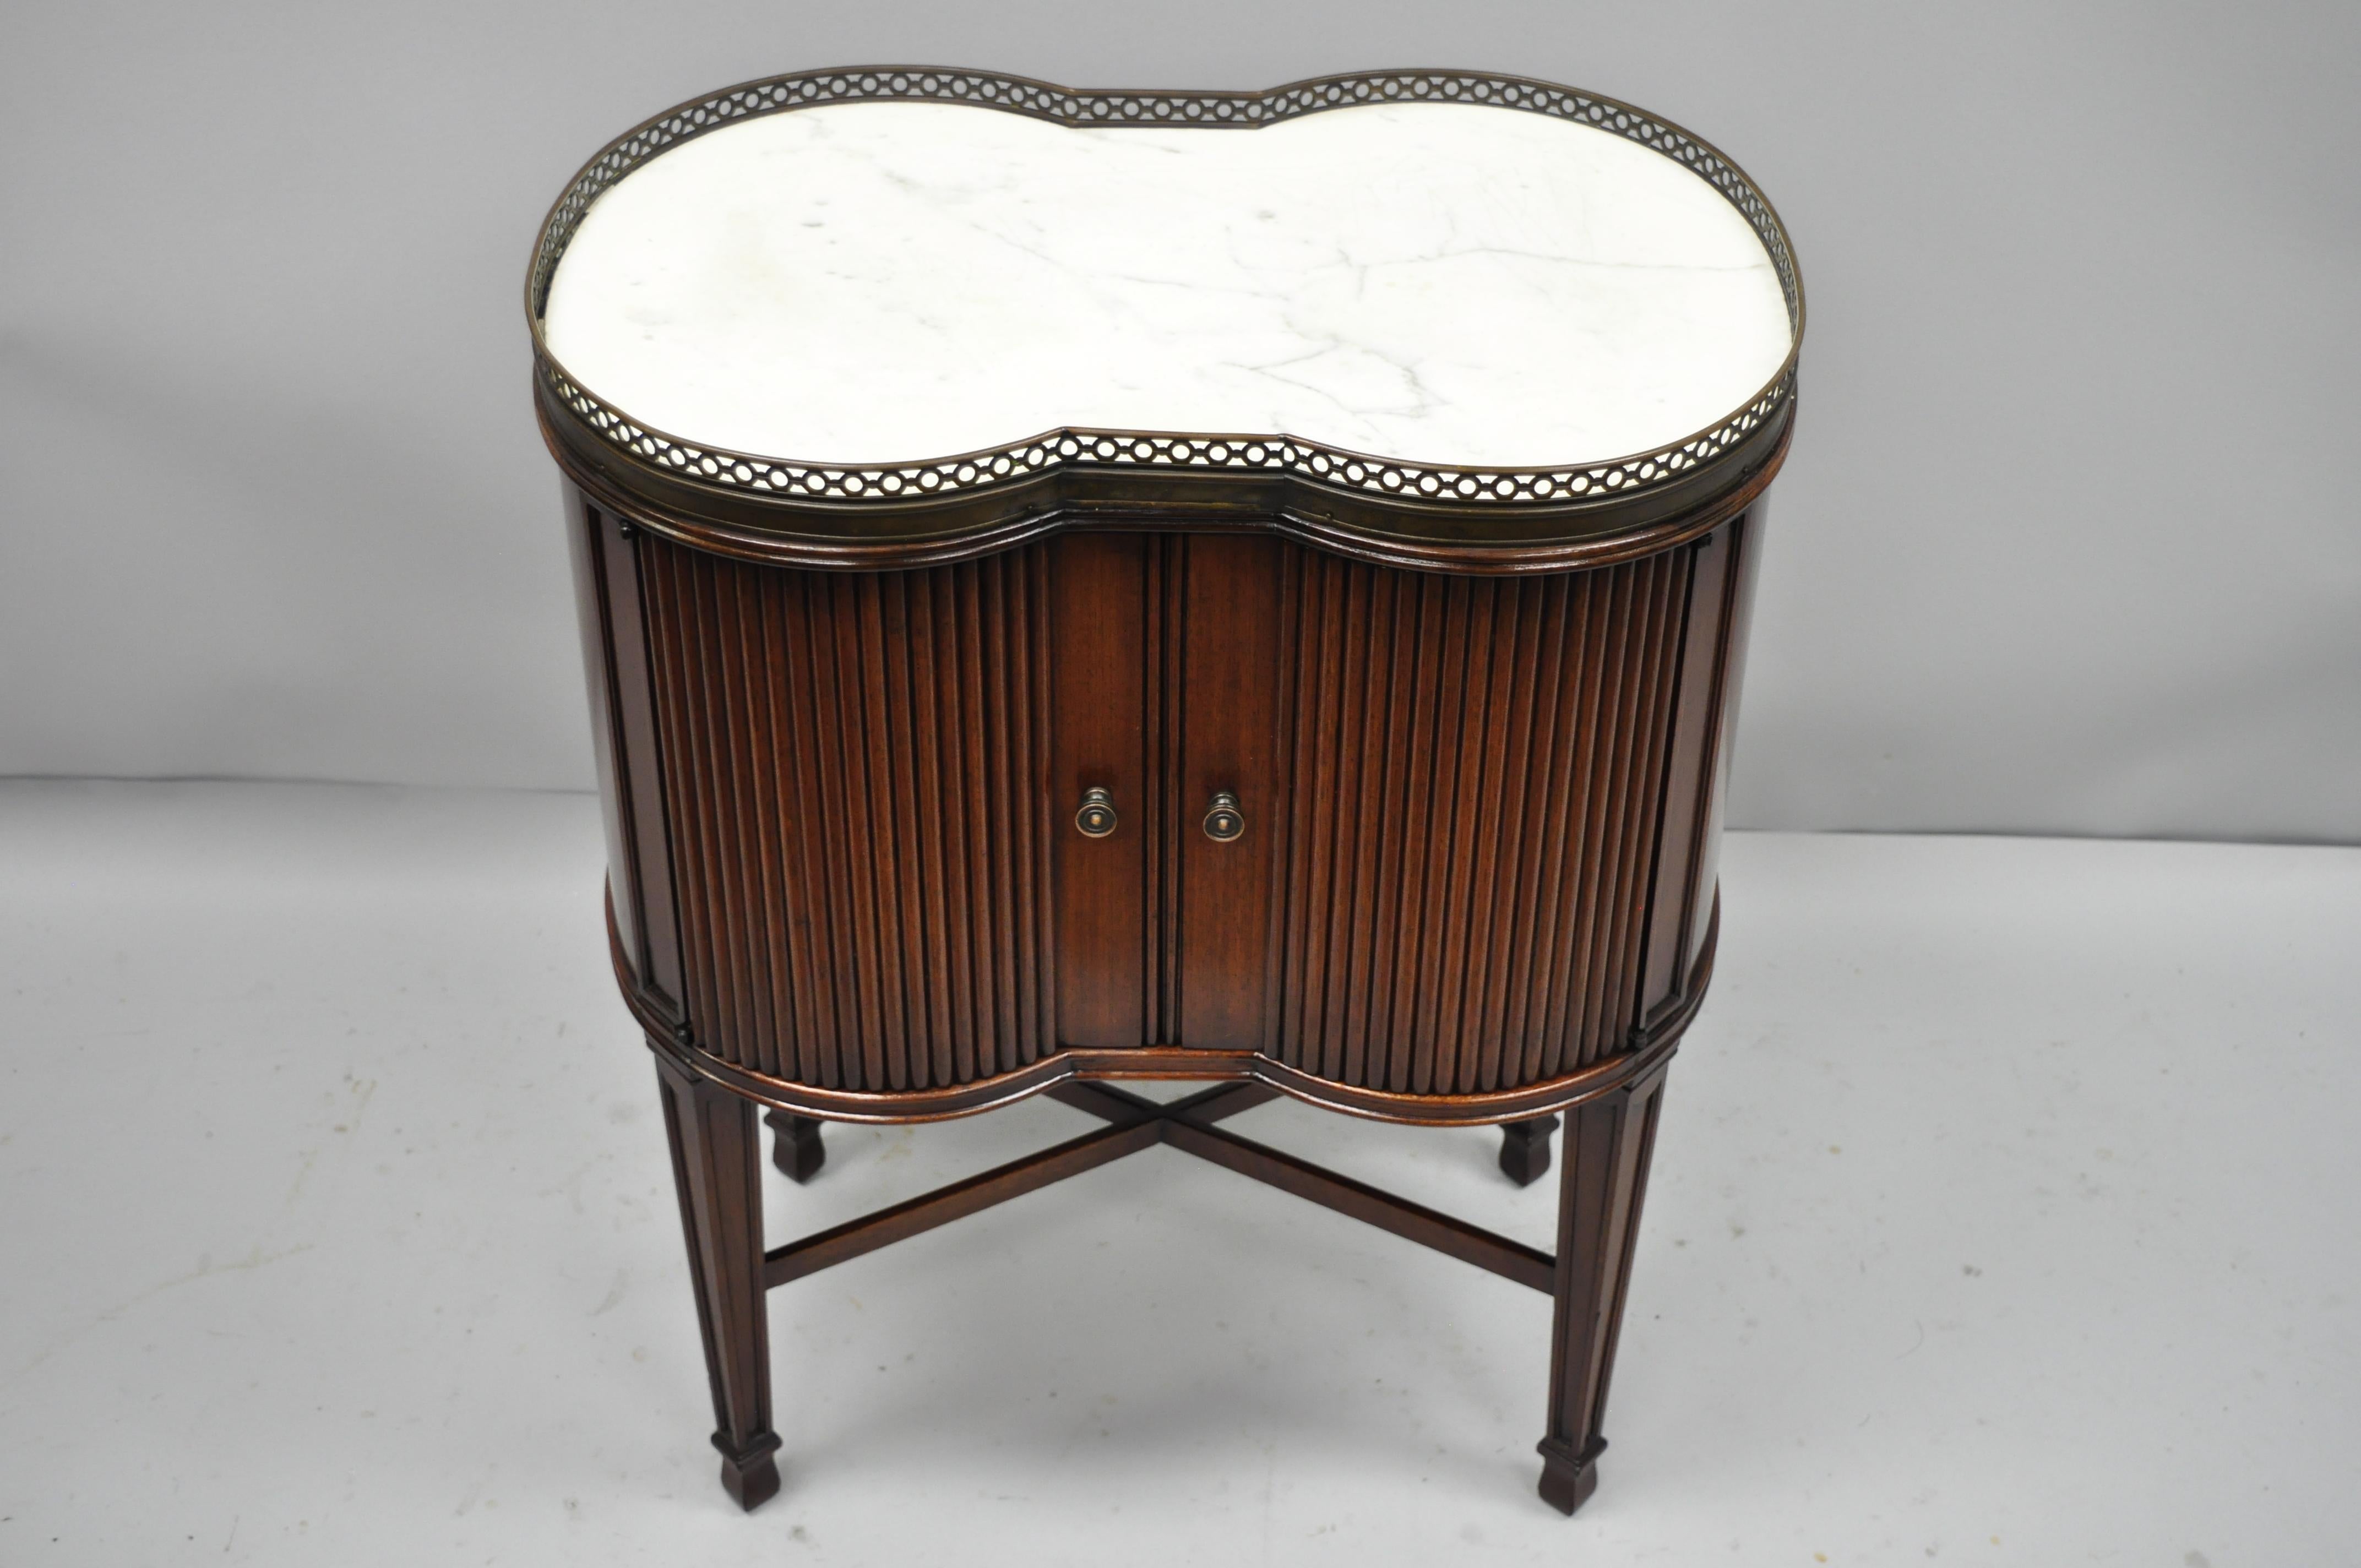 Marble-Top French Louis XVI Maison Jansen style bombe side table. Item features shapely bombe form, inset white shaped marble top, 2 swing doors, tapered legs, stretcher support, and pierced brass gallery, circa 1940. Measurements: 29